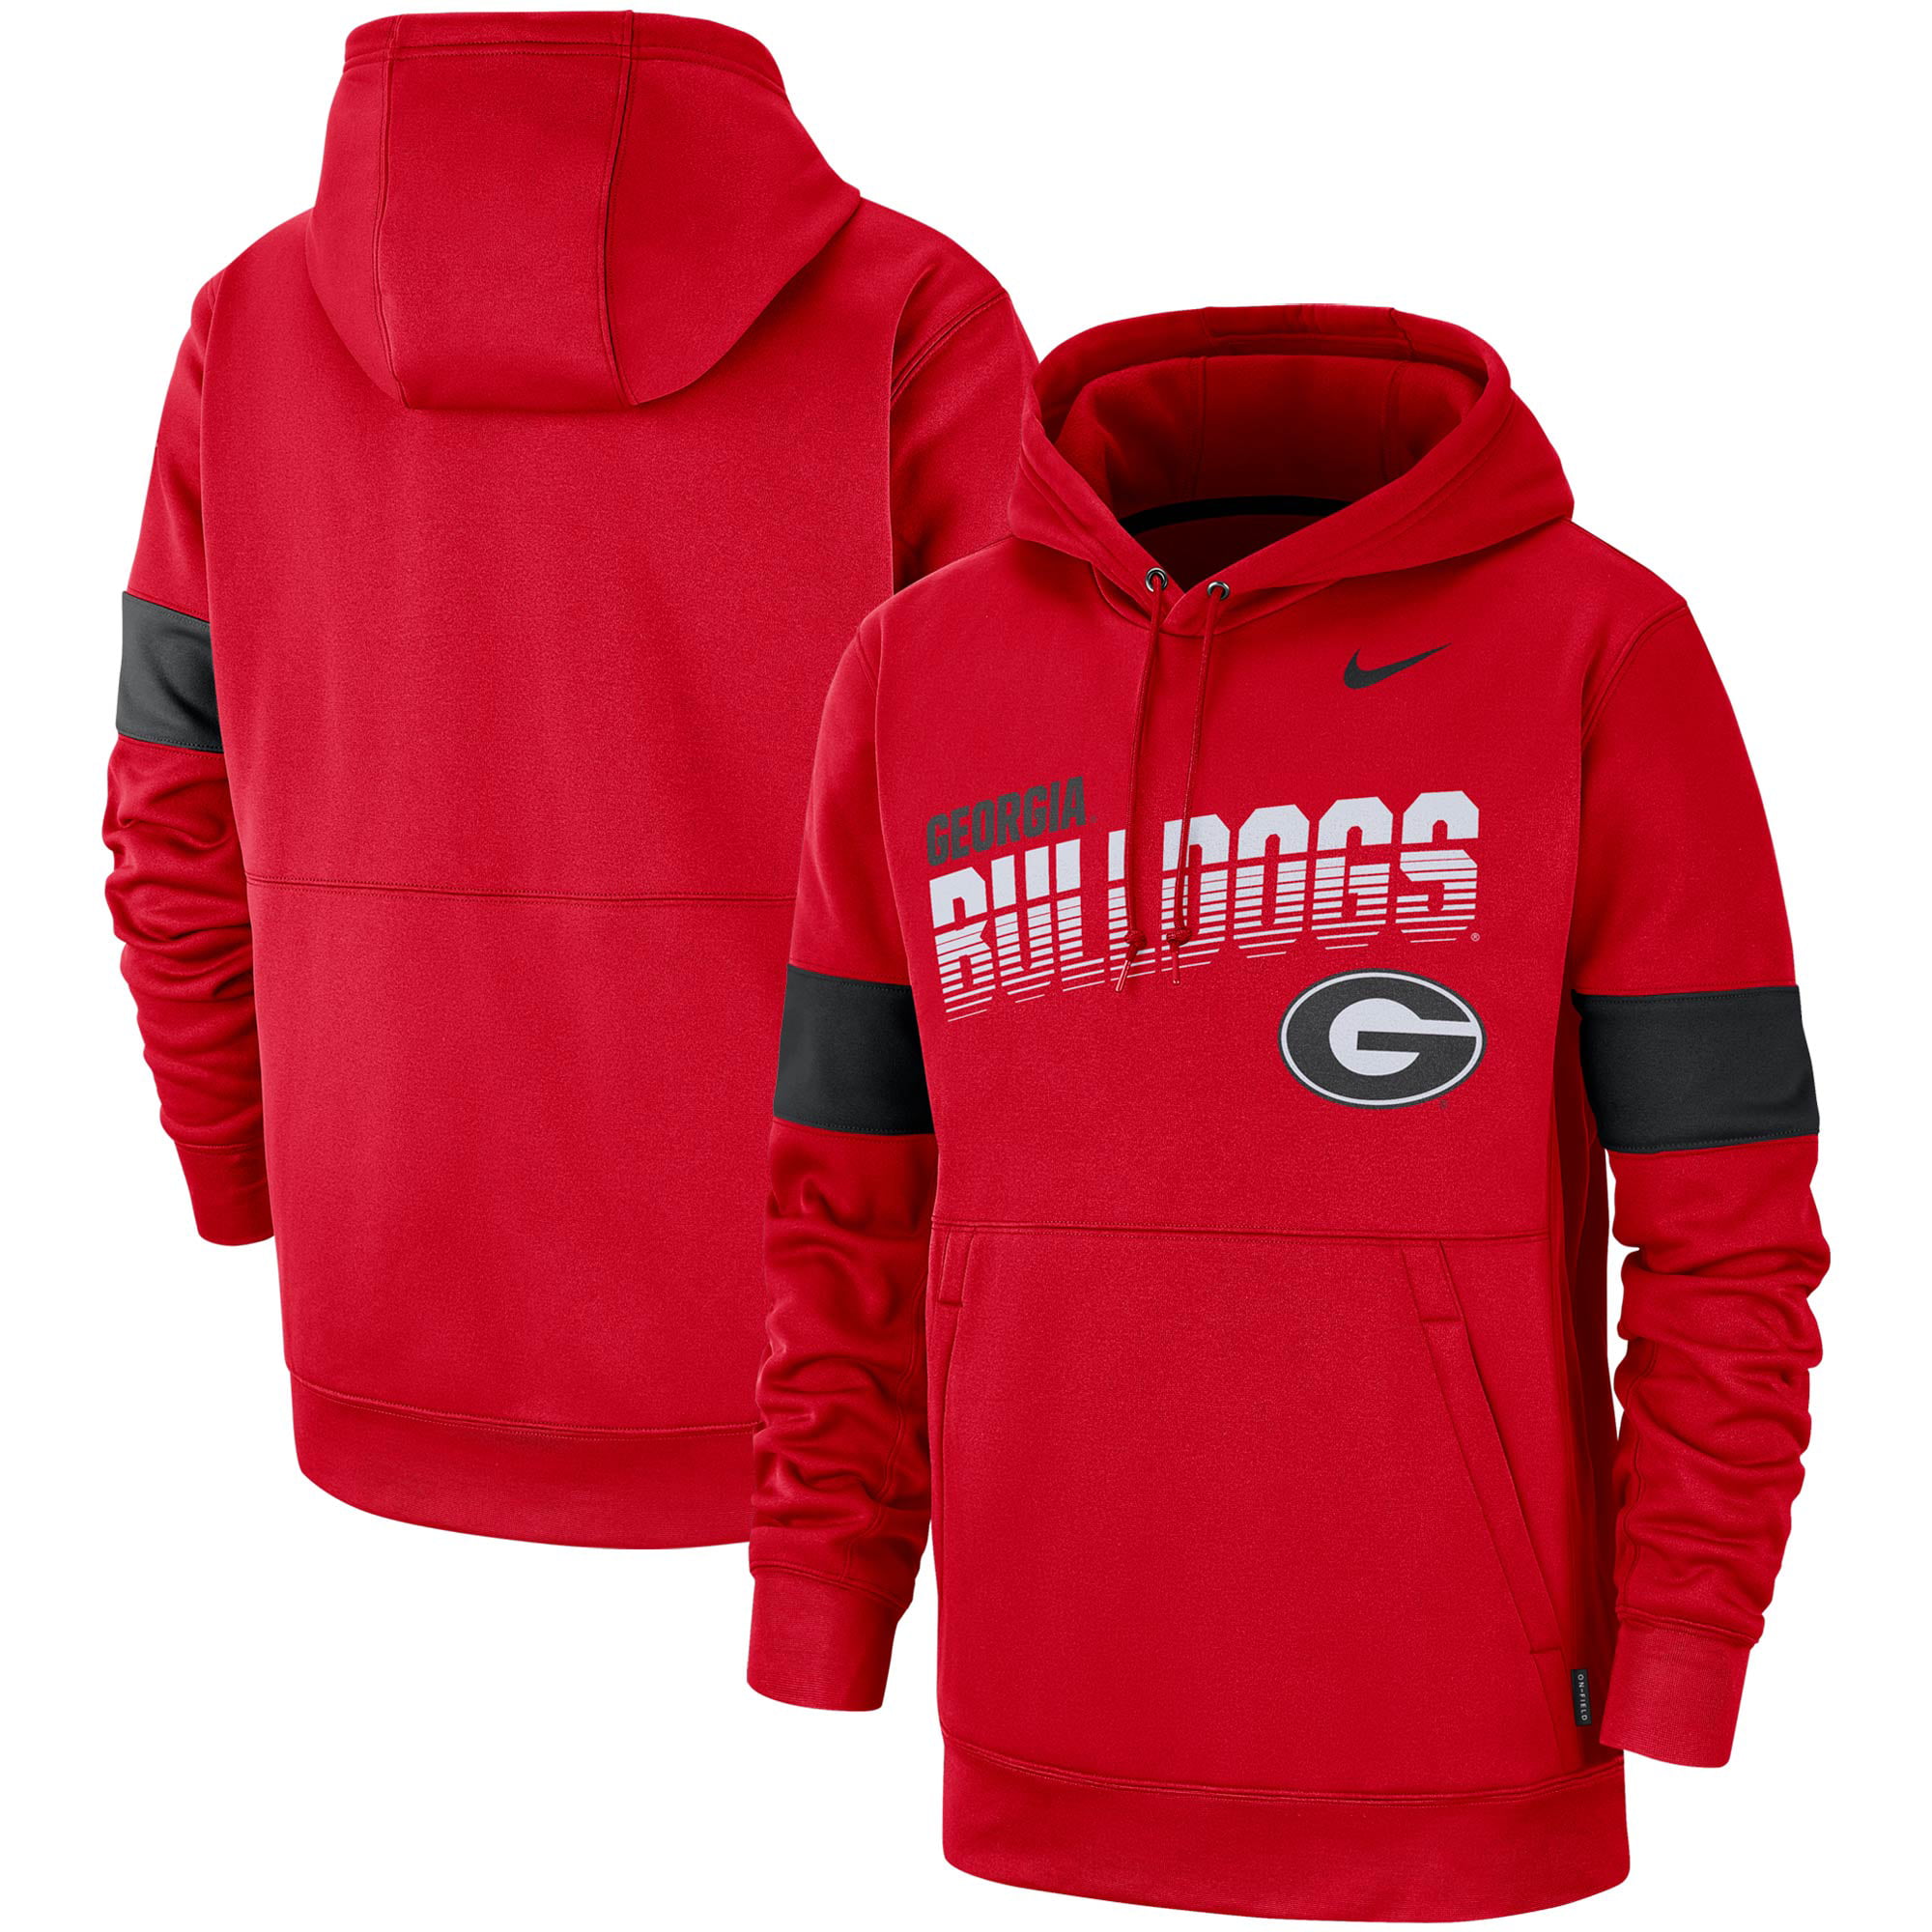 NEW Georgia Bulldogs Football Mens Adult SIZE S Small Hoodie by Majestic 